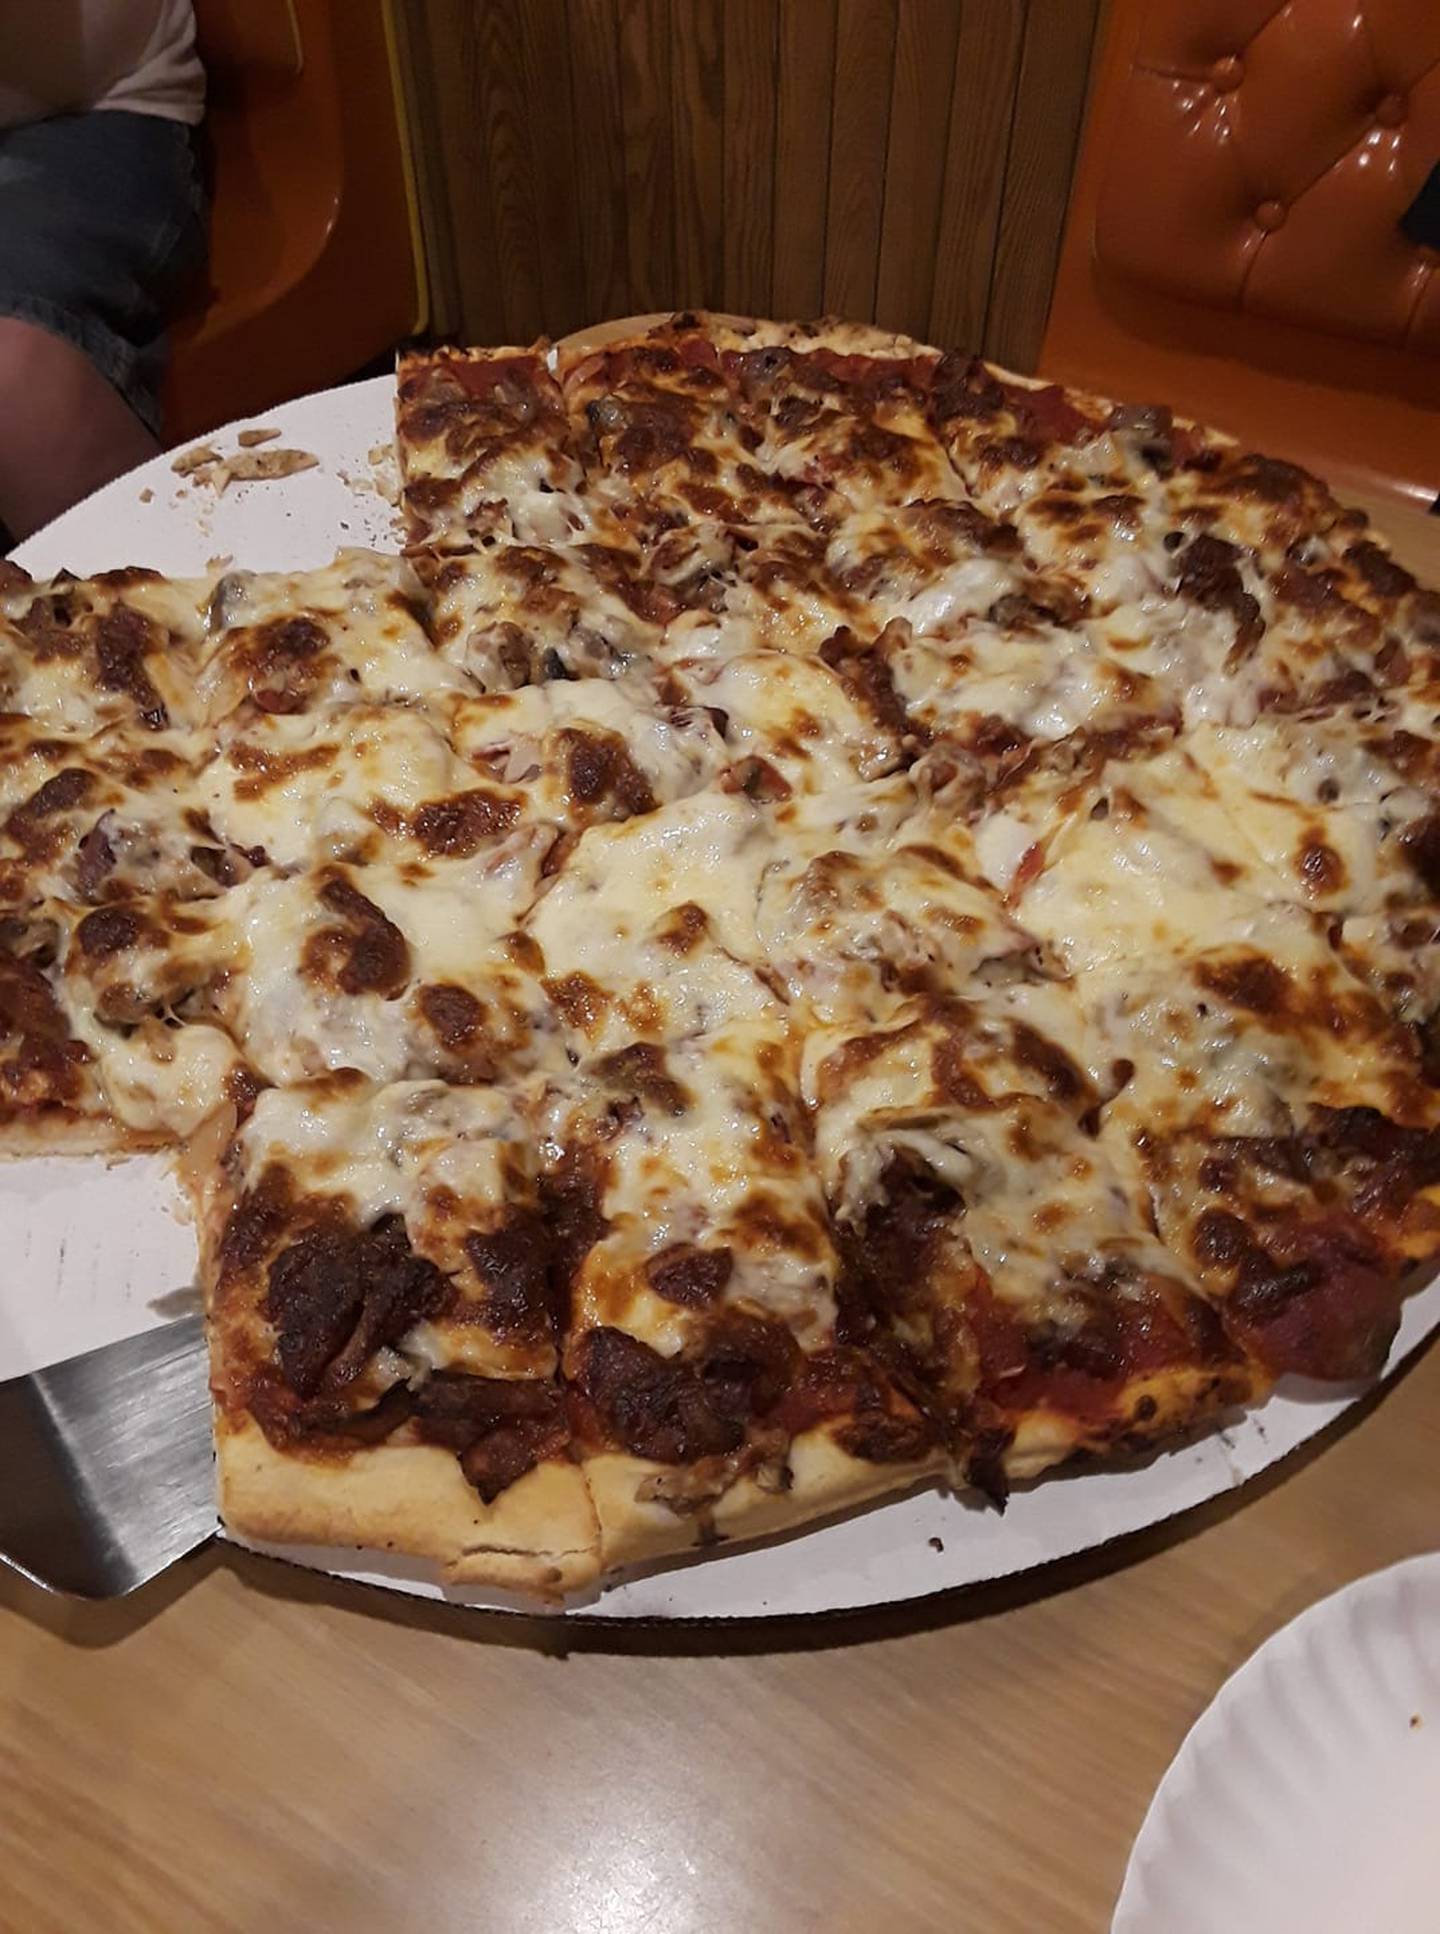 Sam's Pizza was named one of the finest pizza places in DeKalb County by our readers in 2021.